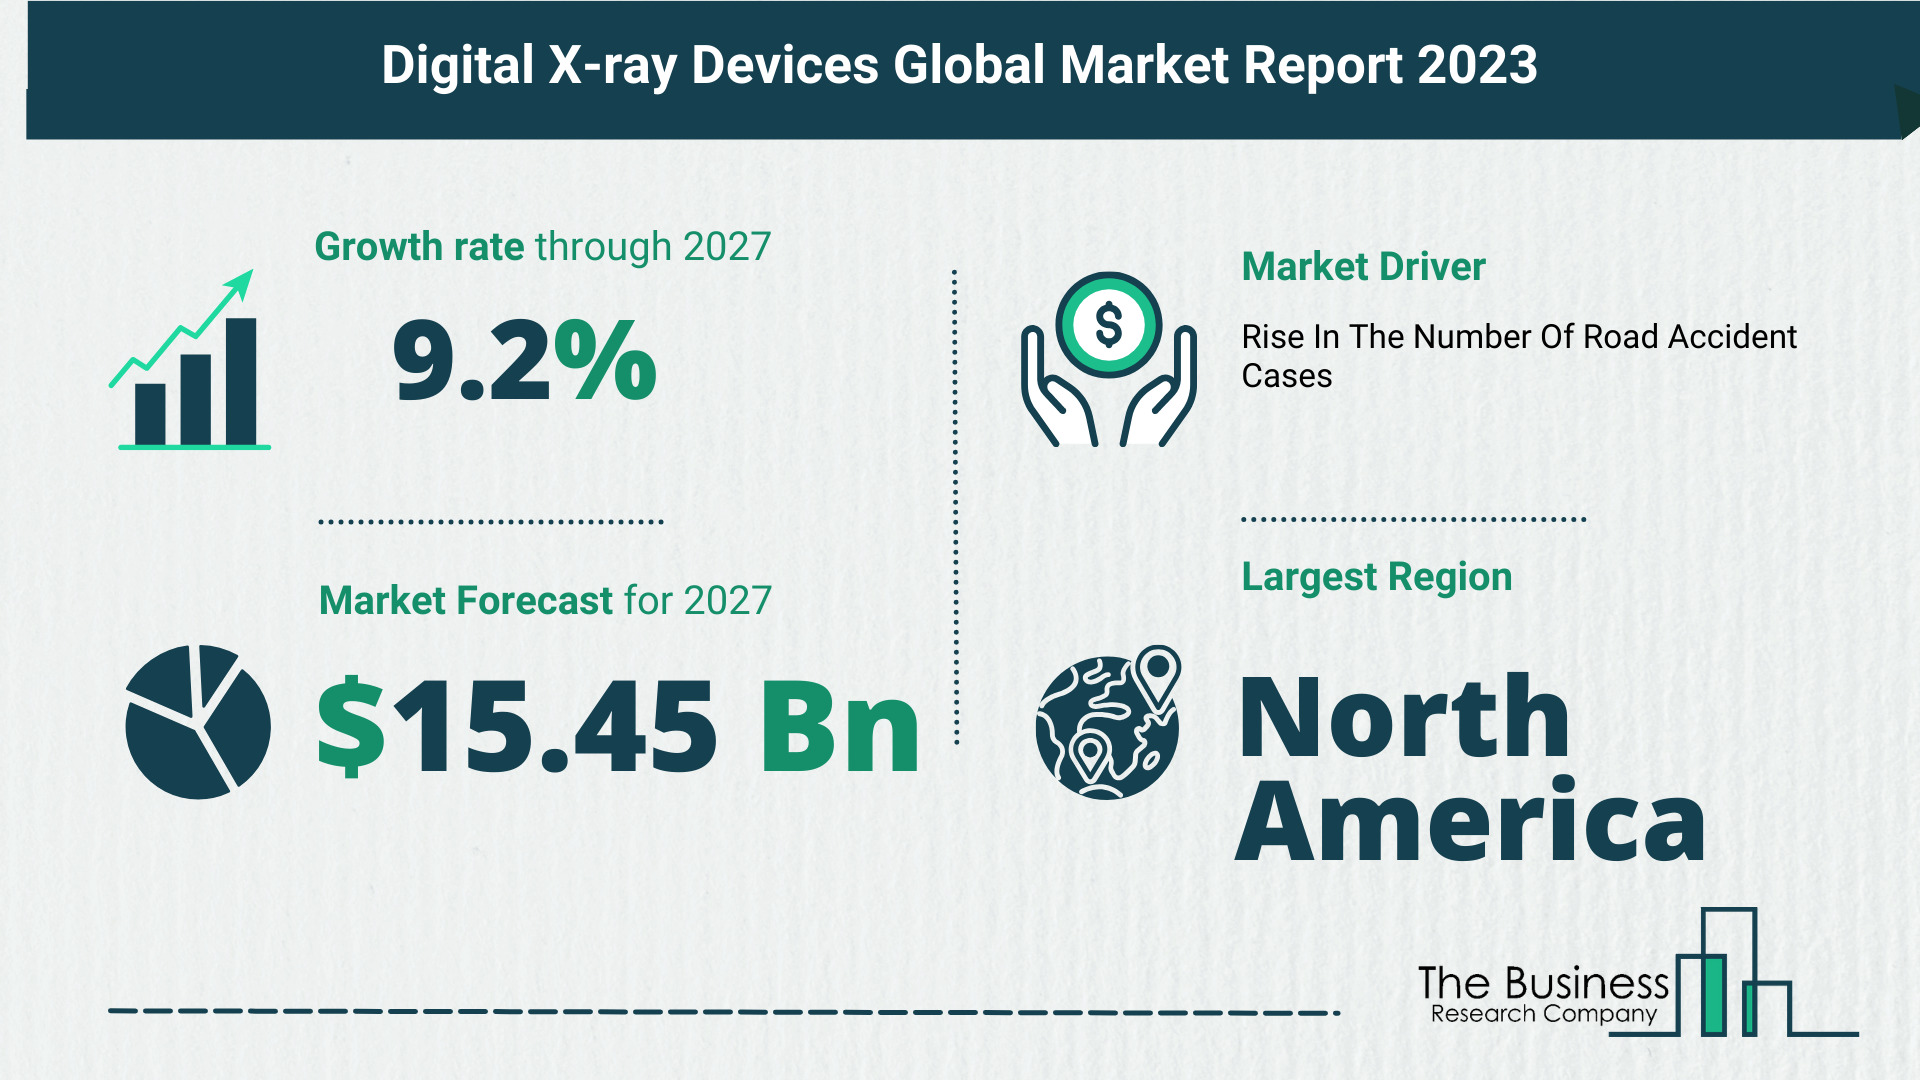 Global Digital X-ray Devices Market Size